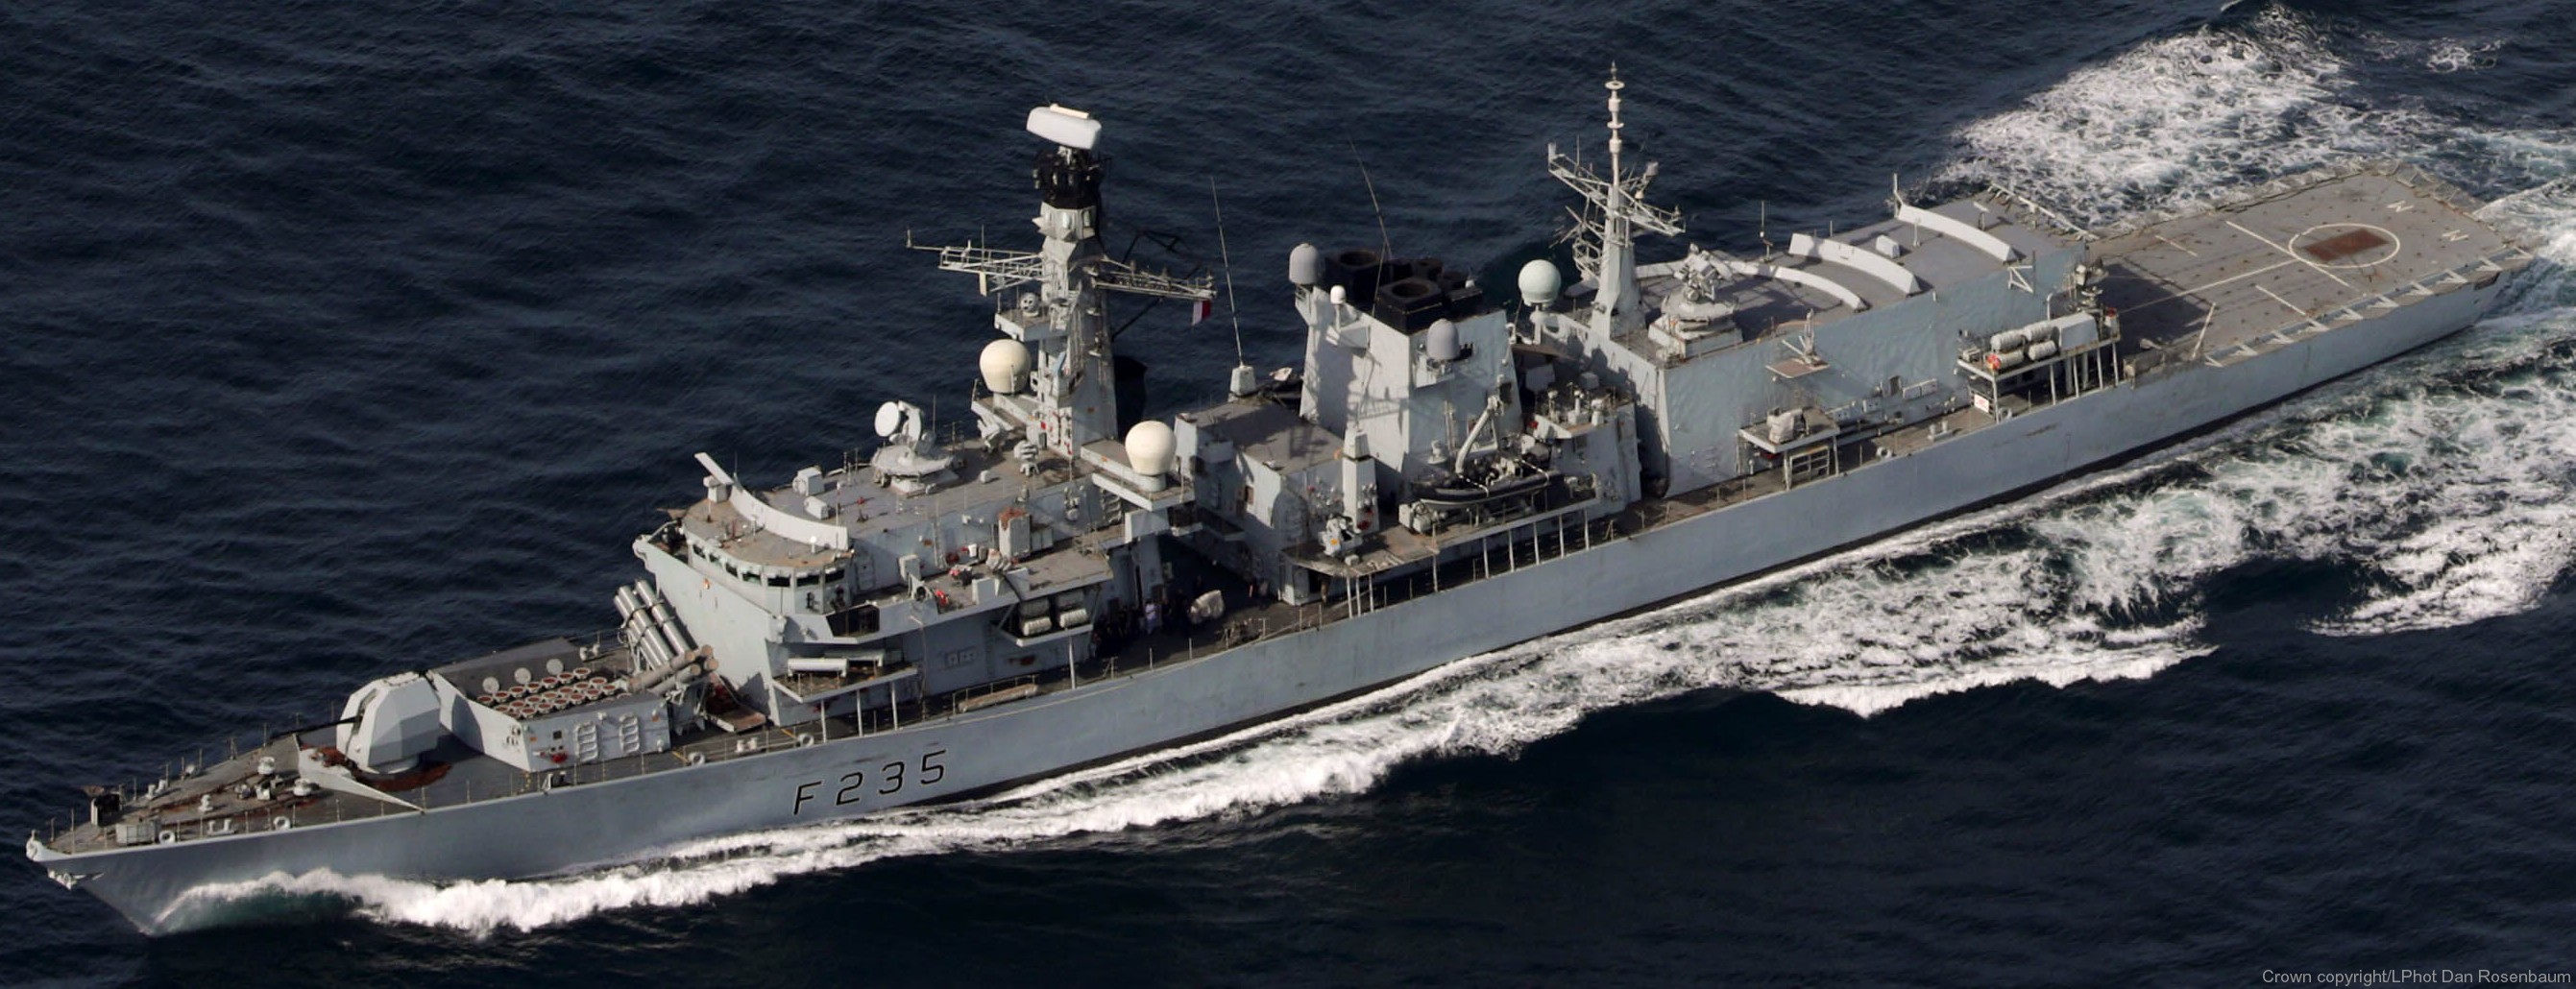 f-235 hms monmouth type 23 duke class guided missile frigate ffg royal navy 27